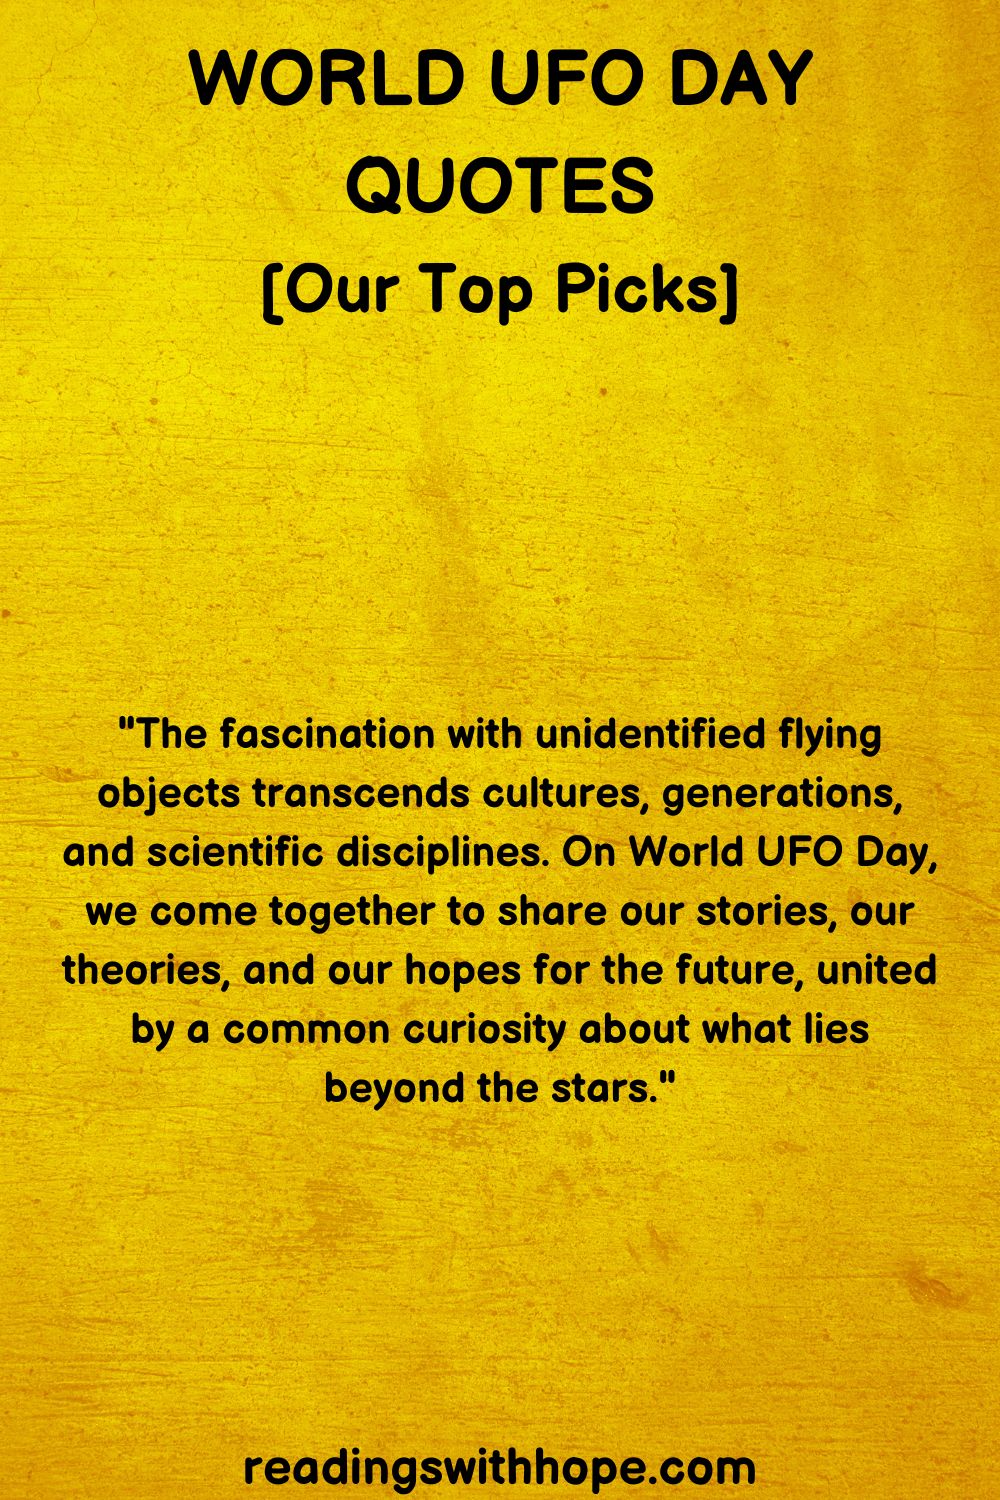 35 World UFO Day Quotes and Messages